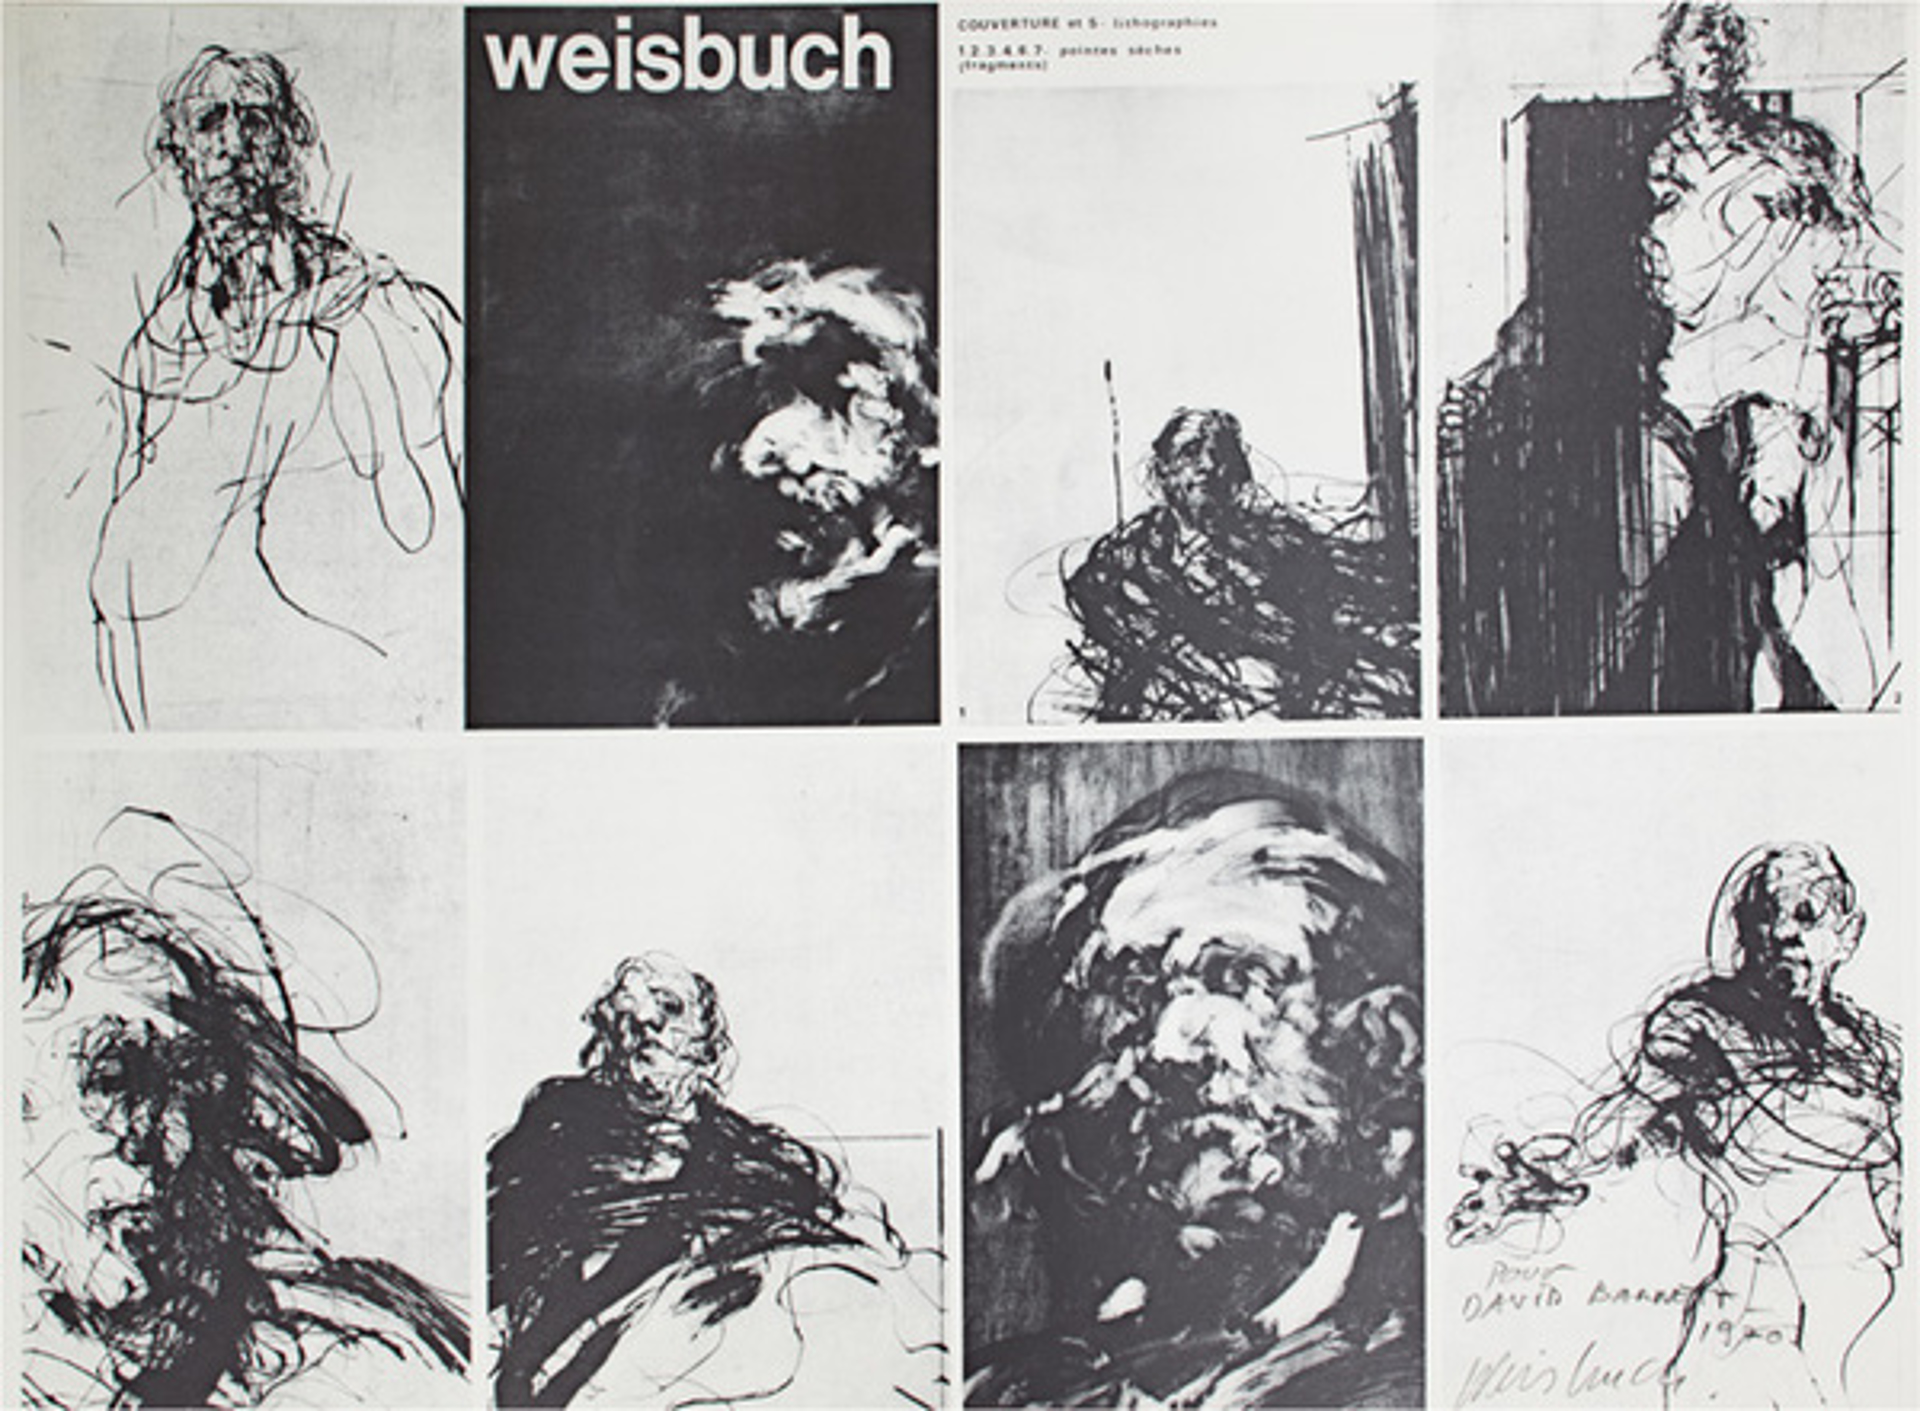 Weisbuch Couverture et 5 lithographs by Claude Weisbuch